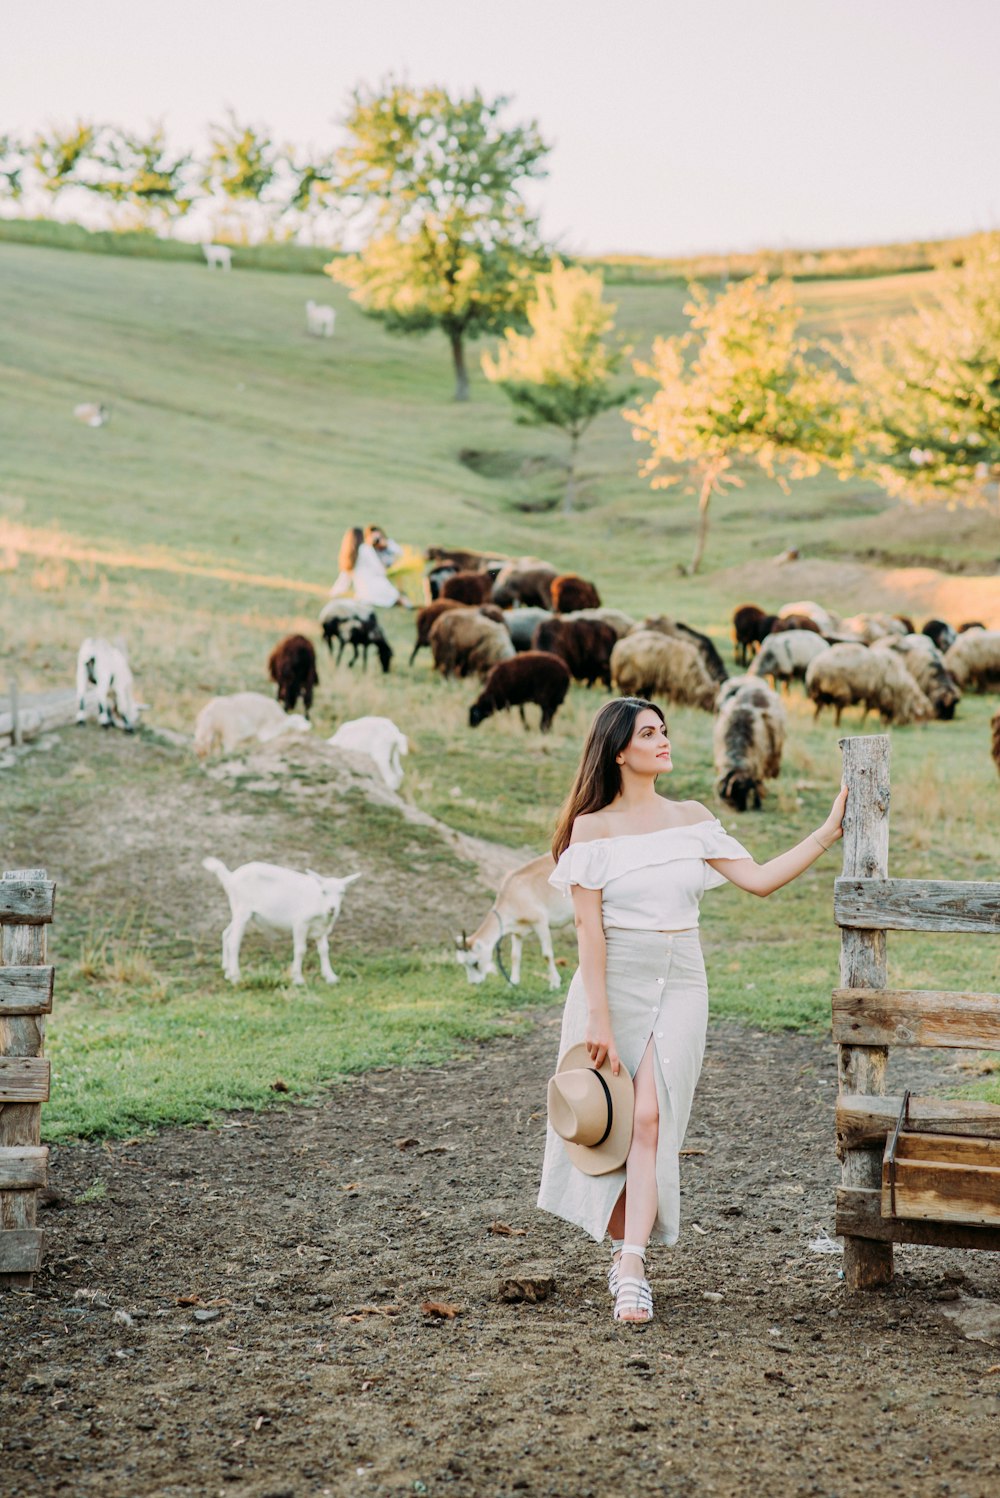 woman in white dress standing beside white goat during daytime